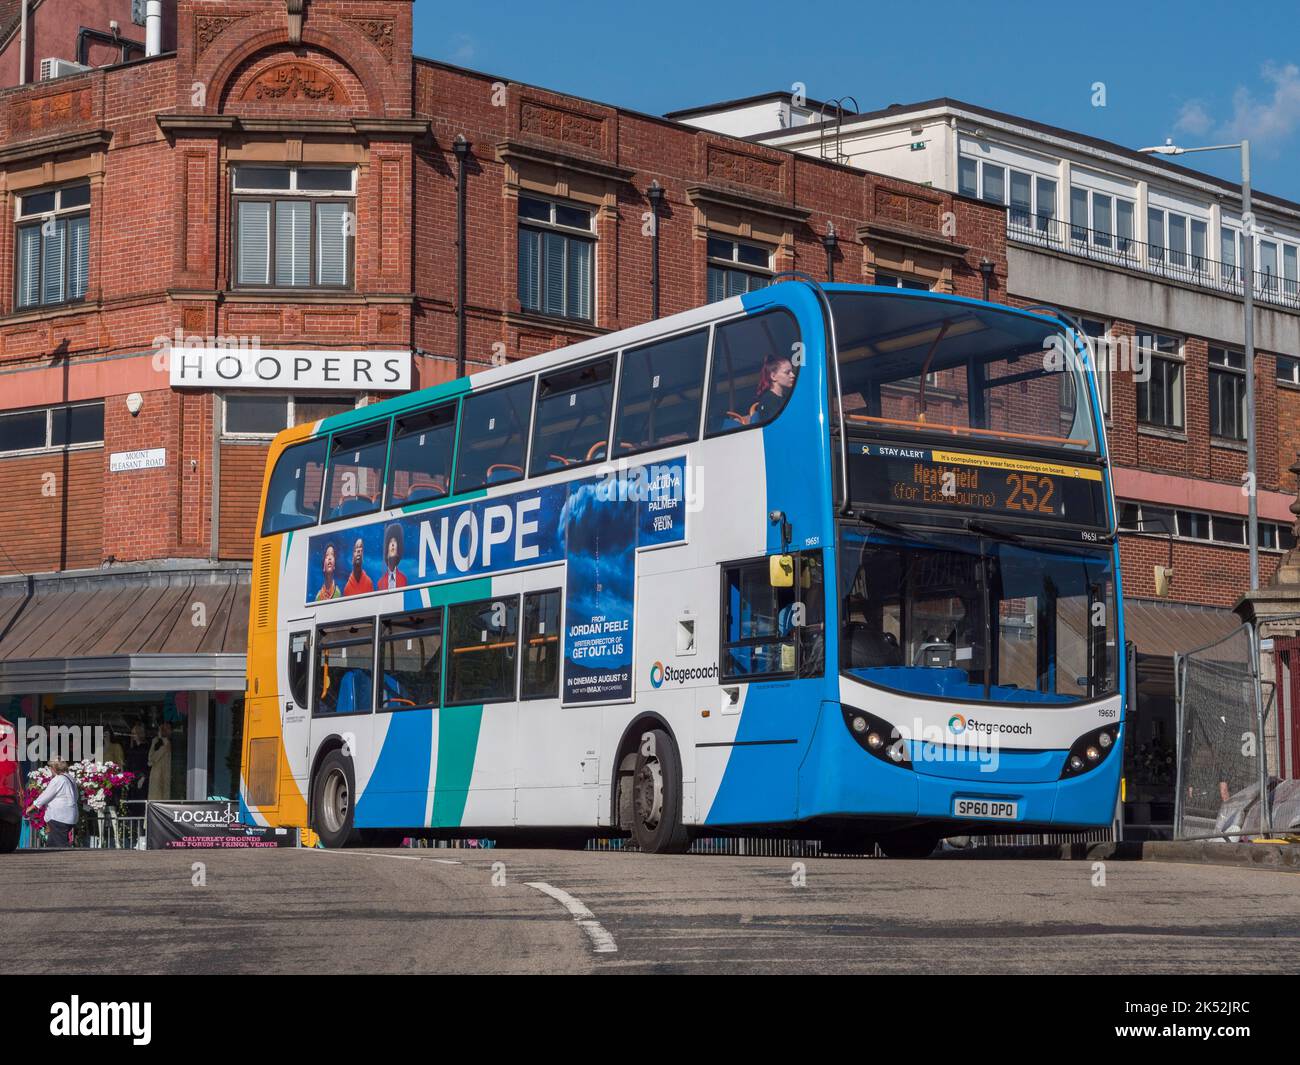 A Stagecoach (no 252) bus on the way to Heathfield (for Eastbourne) in the centre of Royal Tunbridge Wells, Kent, UK. Stock Photo